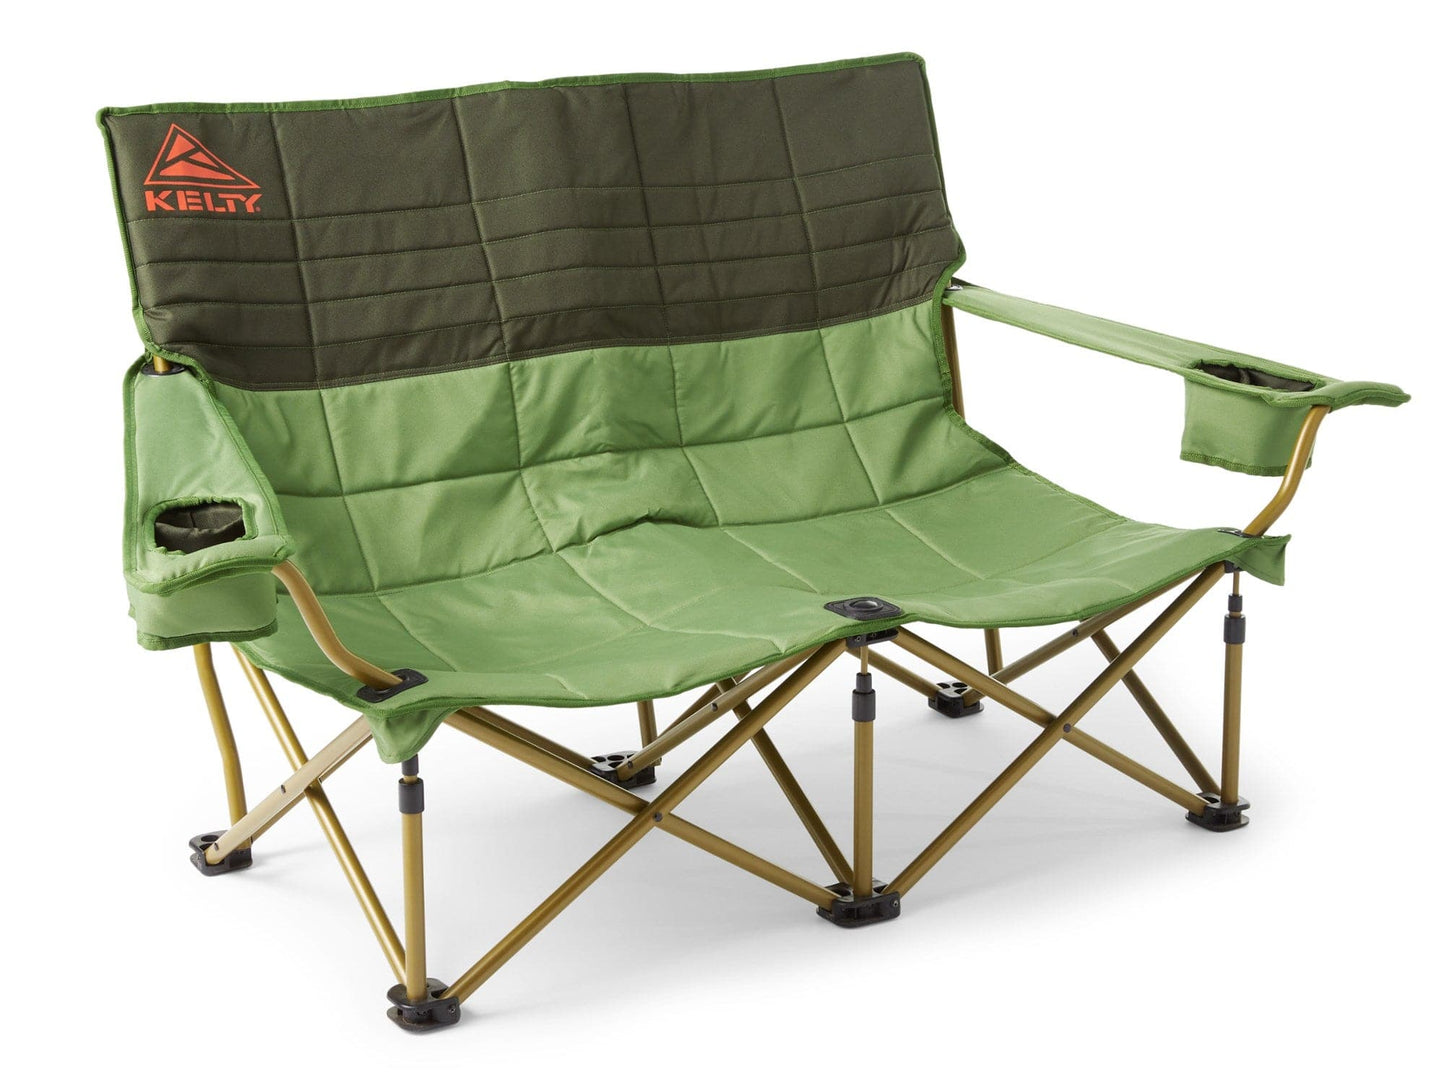 Featuring the Low Loveseat chair manufactured by Kelty shown here from a third angle.